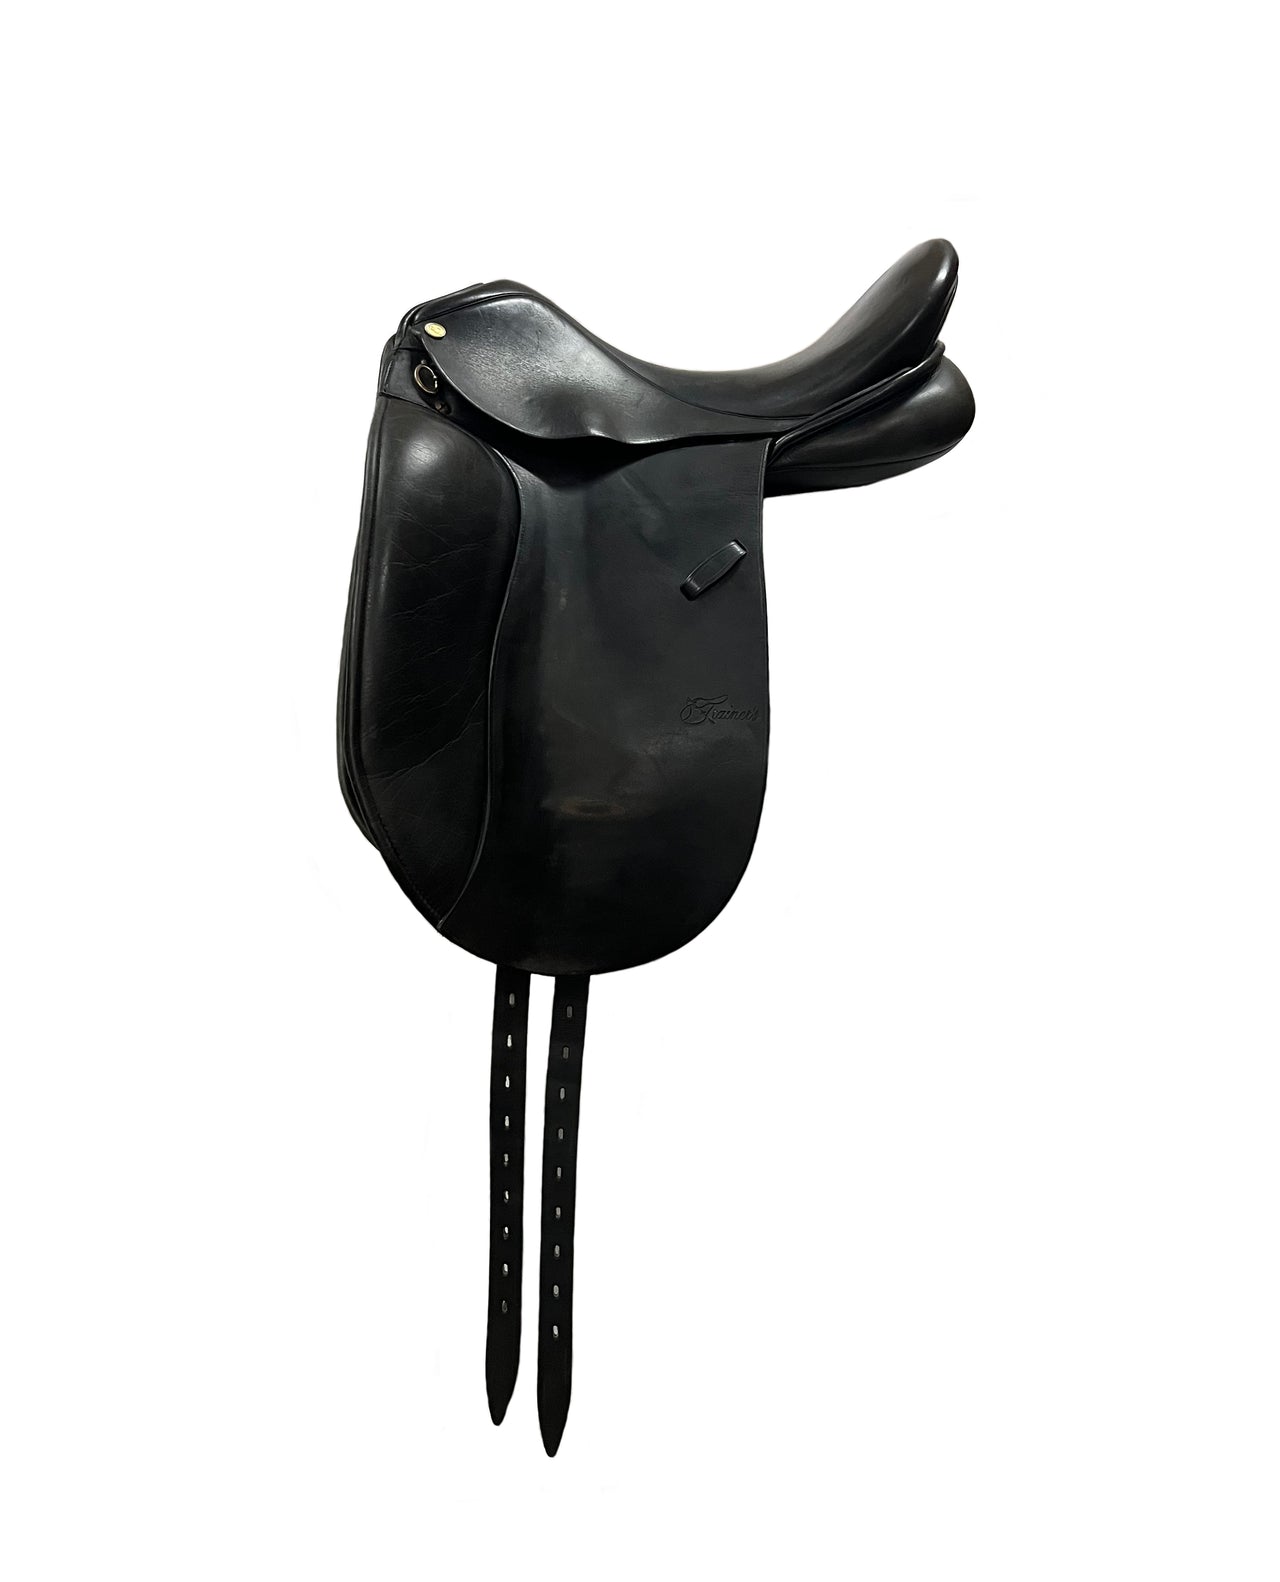 Jessica Trainer Dressage 17 Inch - The Trading Stables